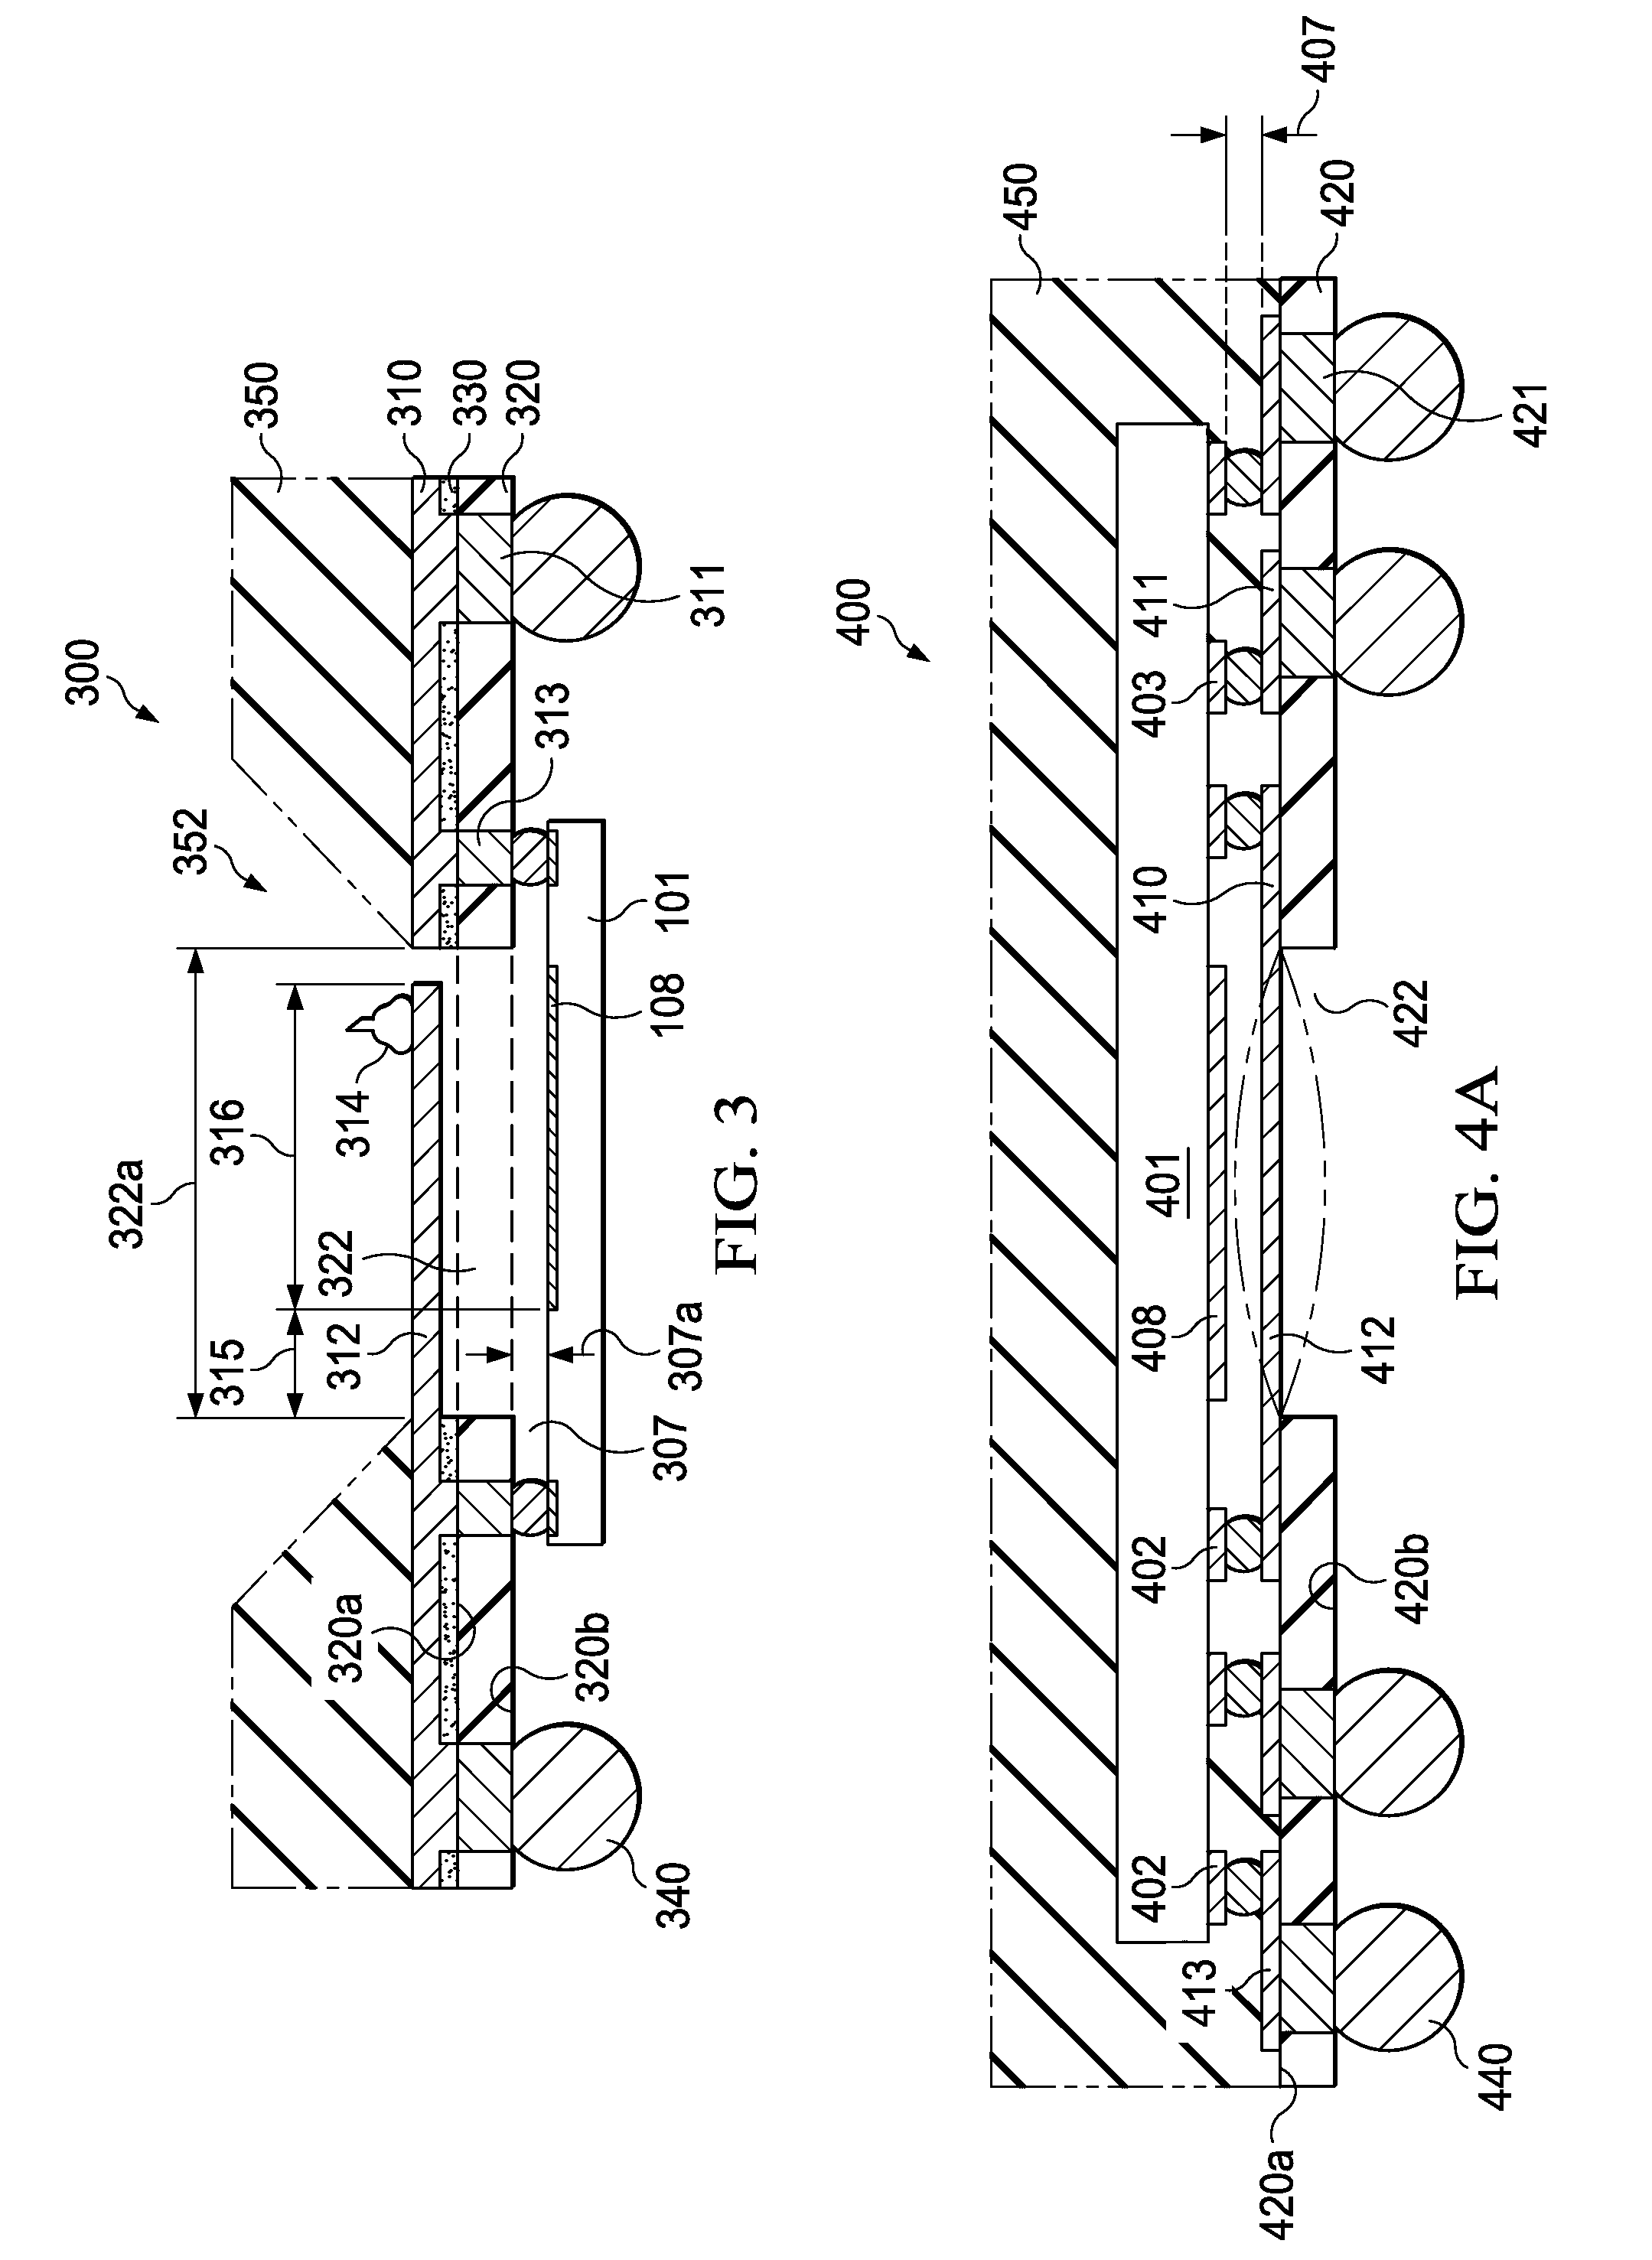 Micro-Electro-Mechanical System Having Movable Element Integrated into Substrate-Based Package